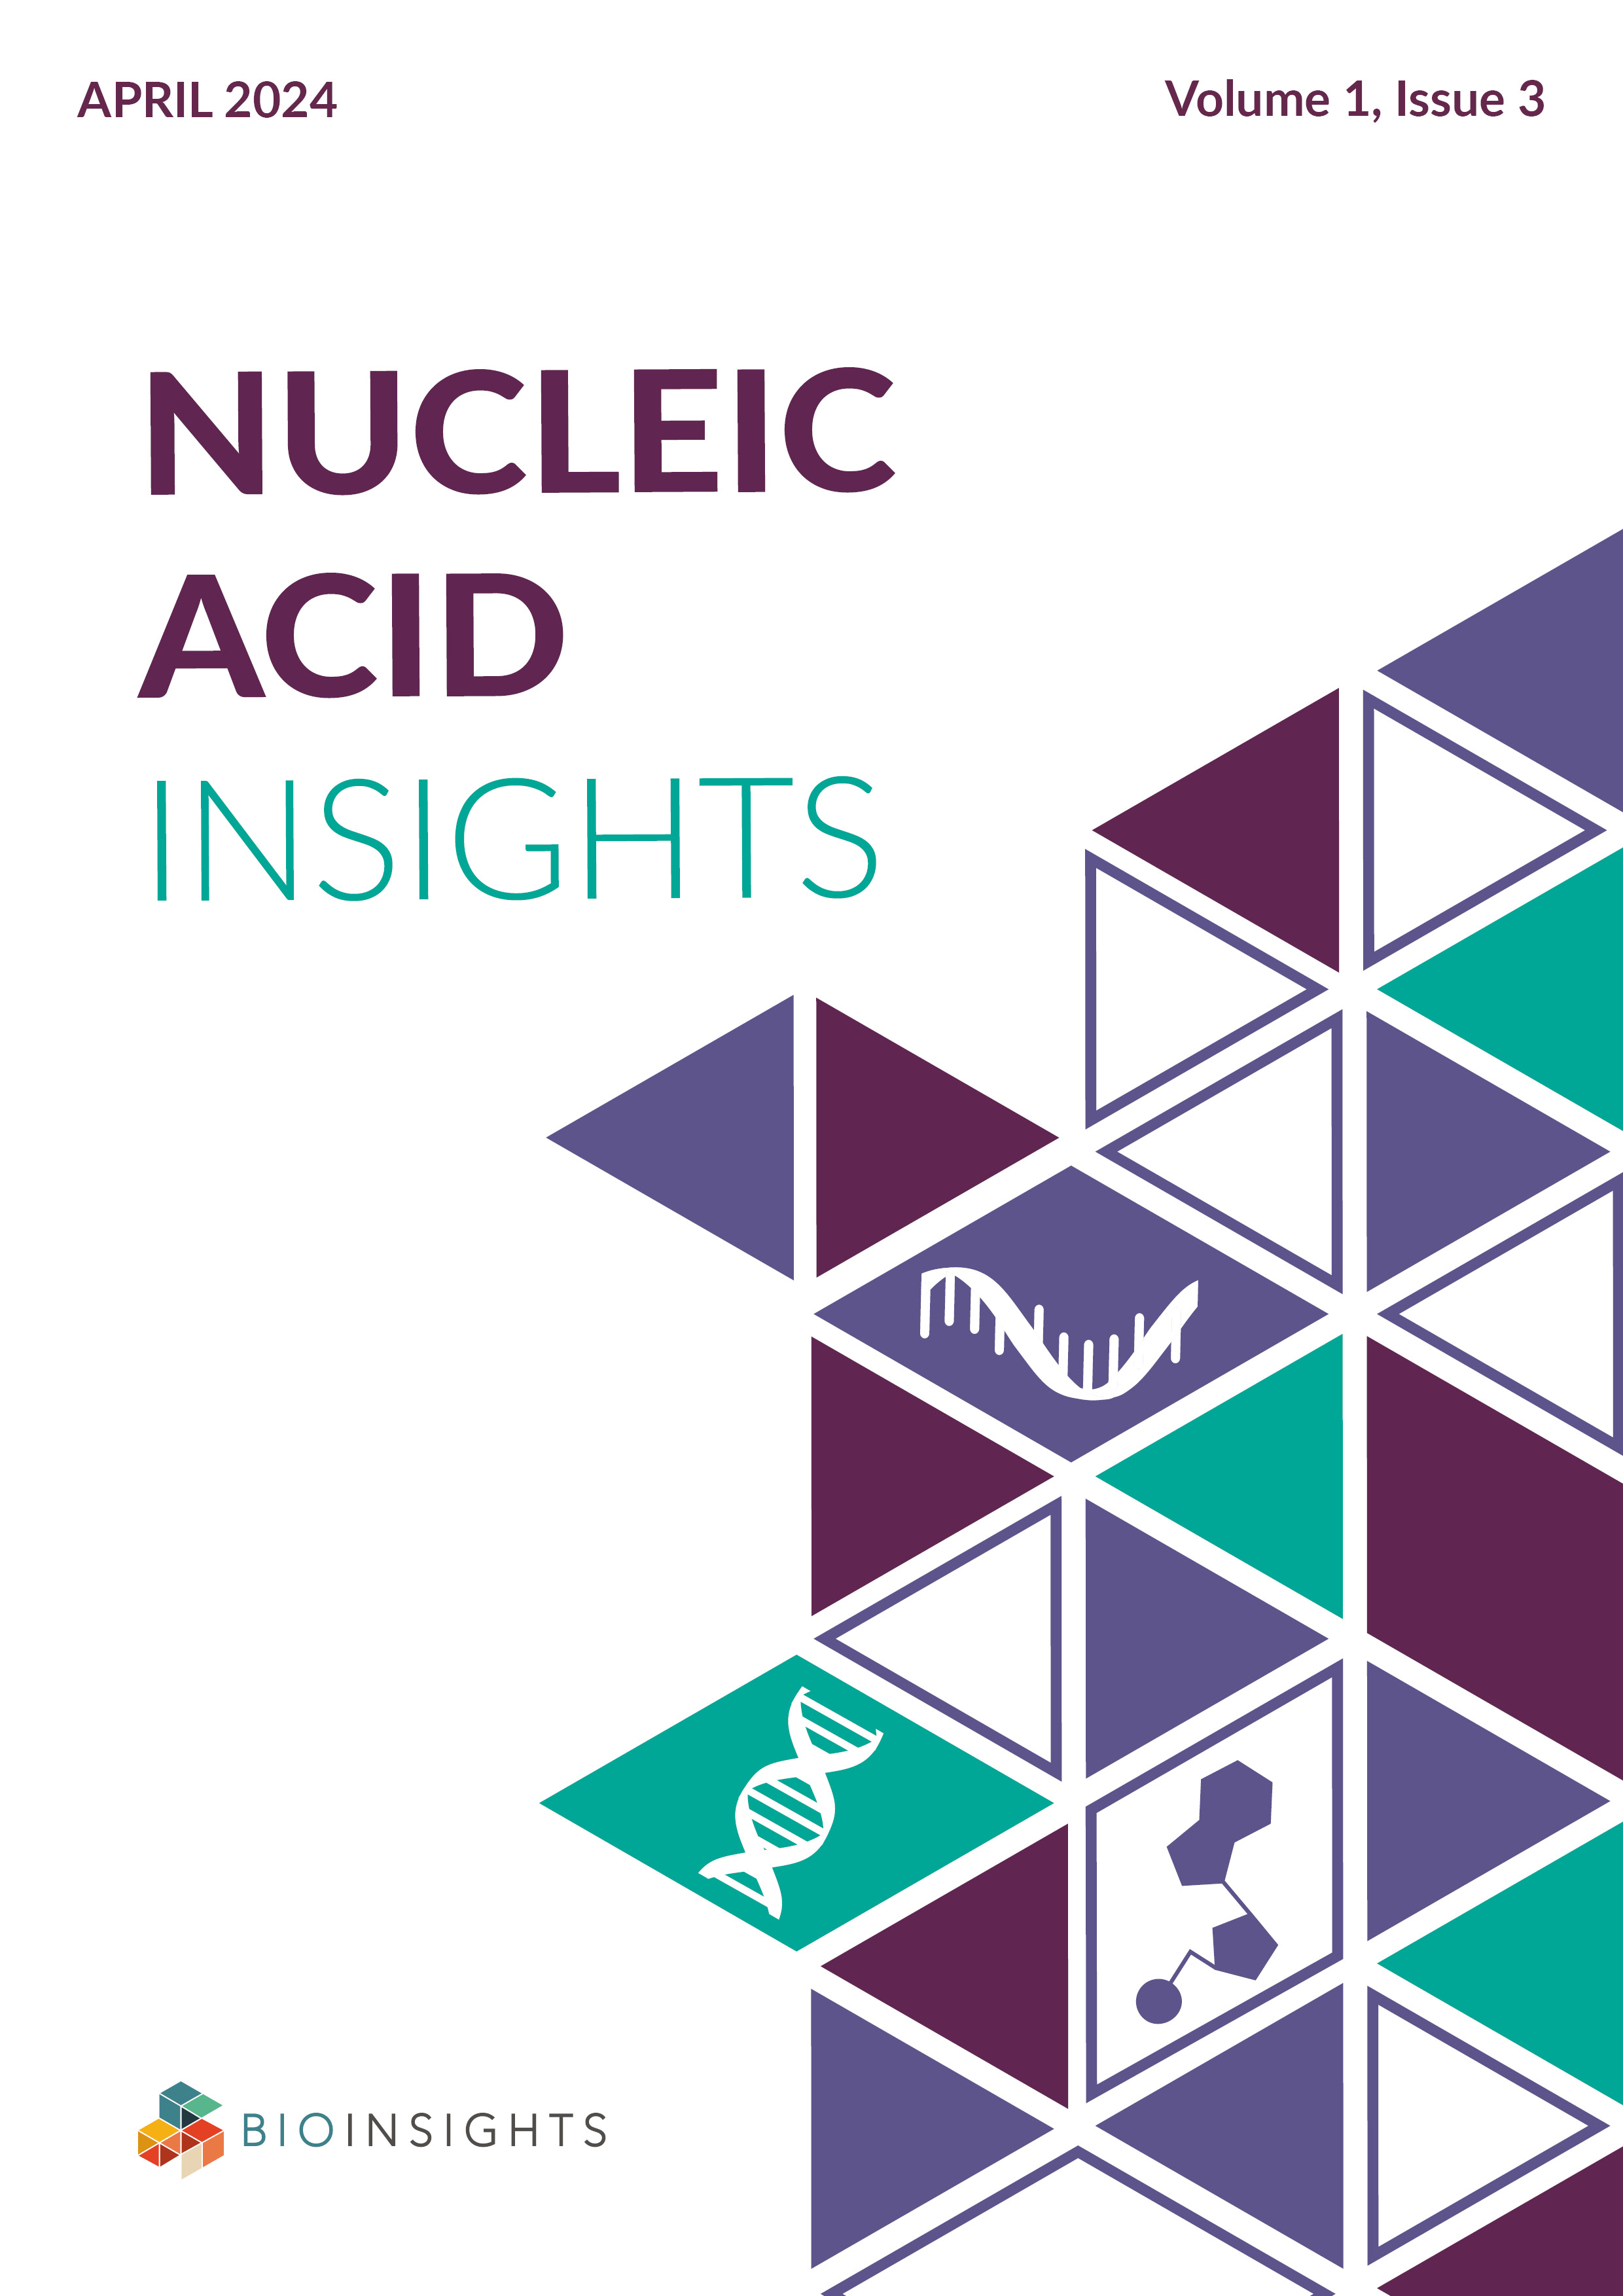 Nucleic Acid Insights Vol 1 Issue 3